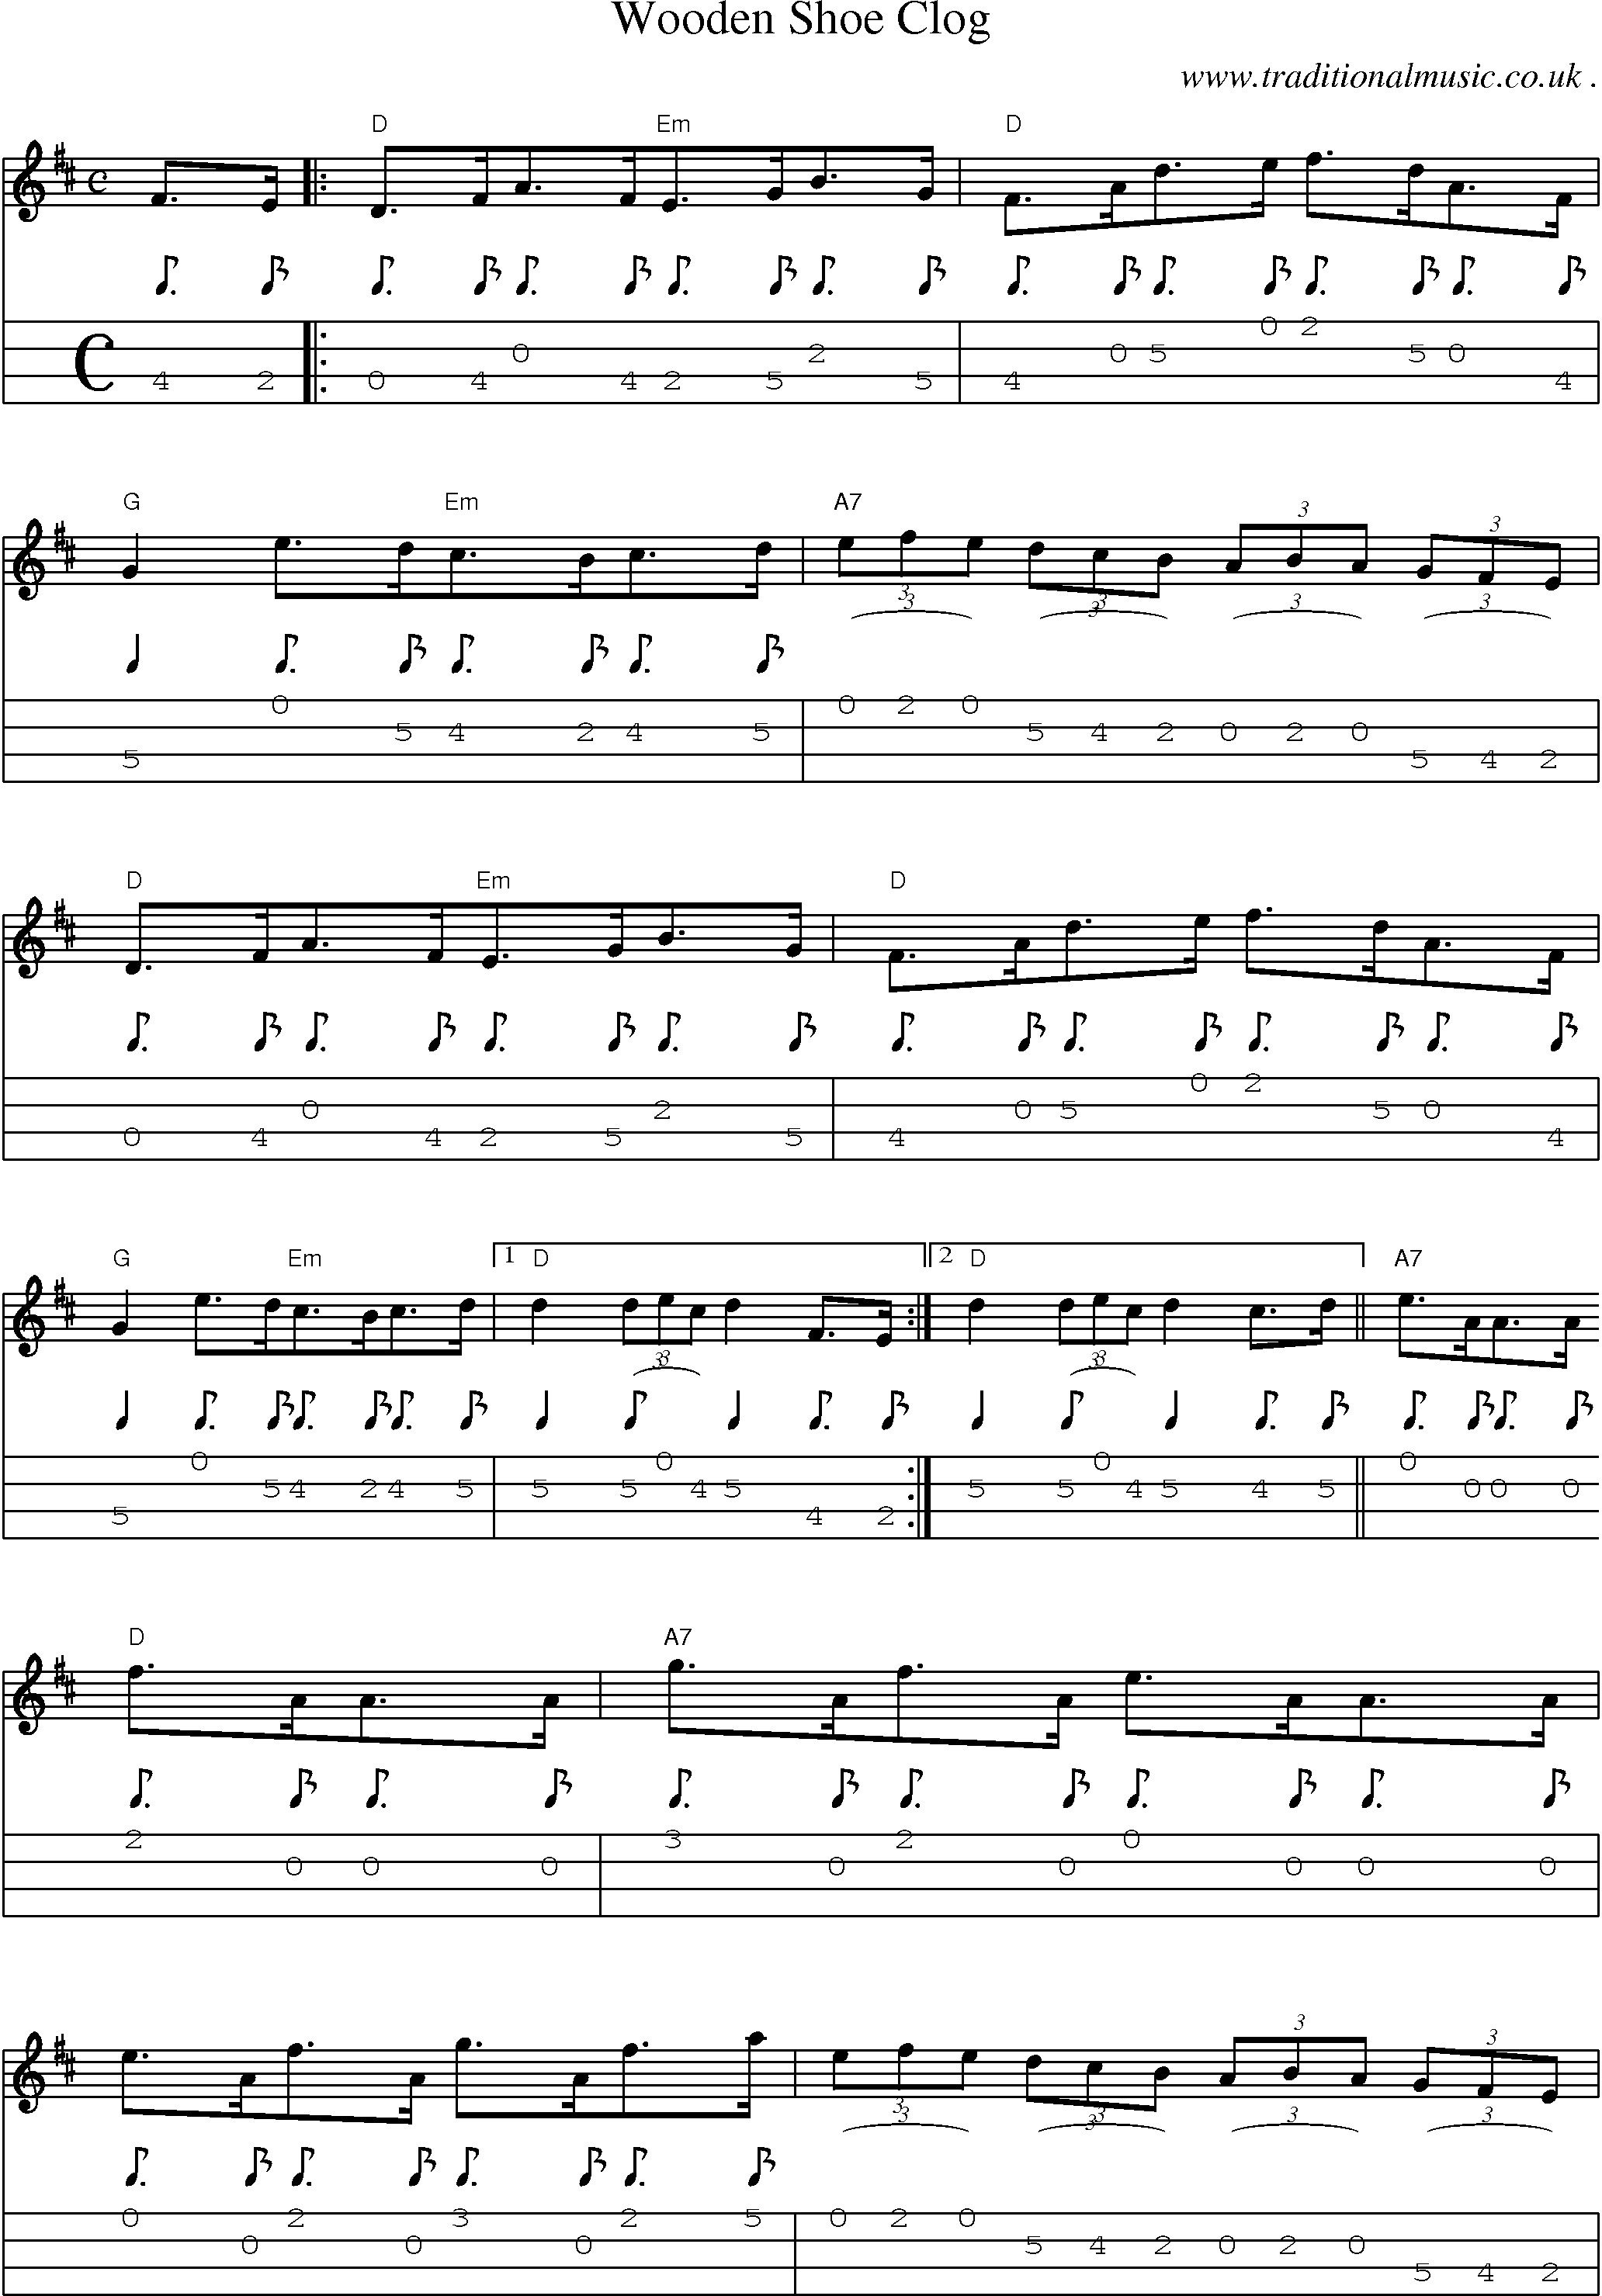 Sheet-Music and Mandolin Tabs for Wooden Shoe Clog